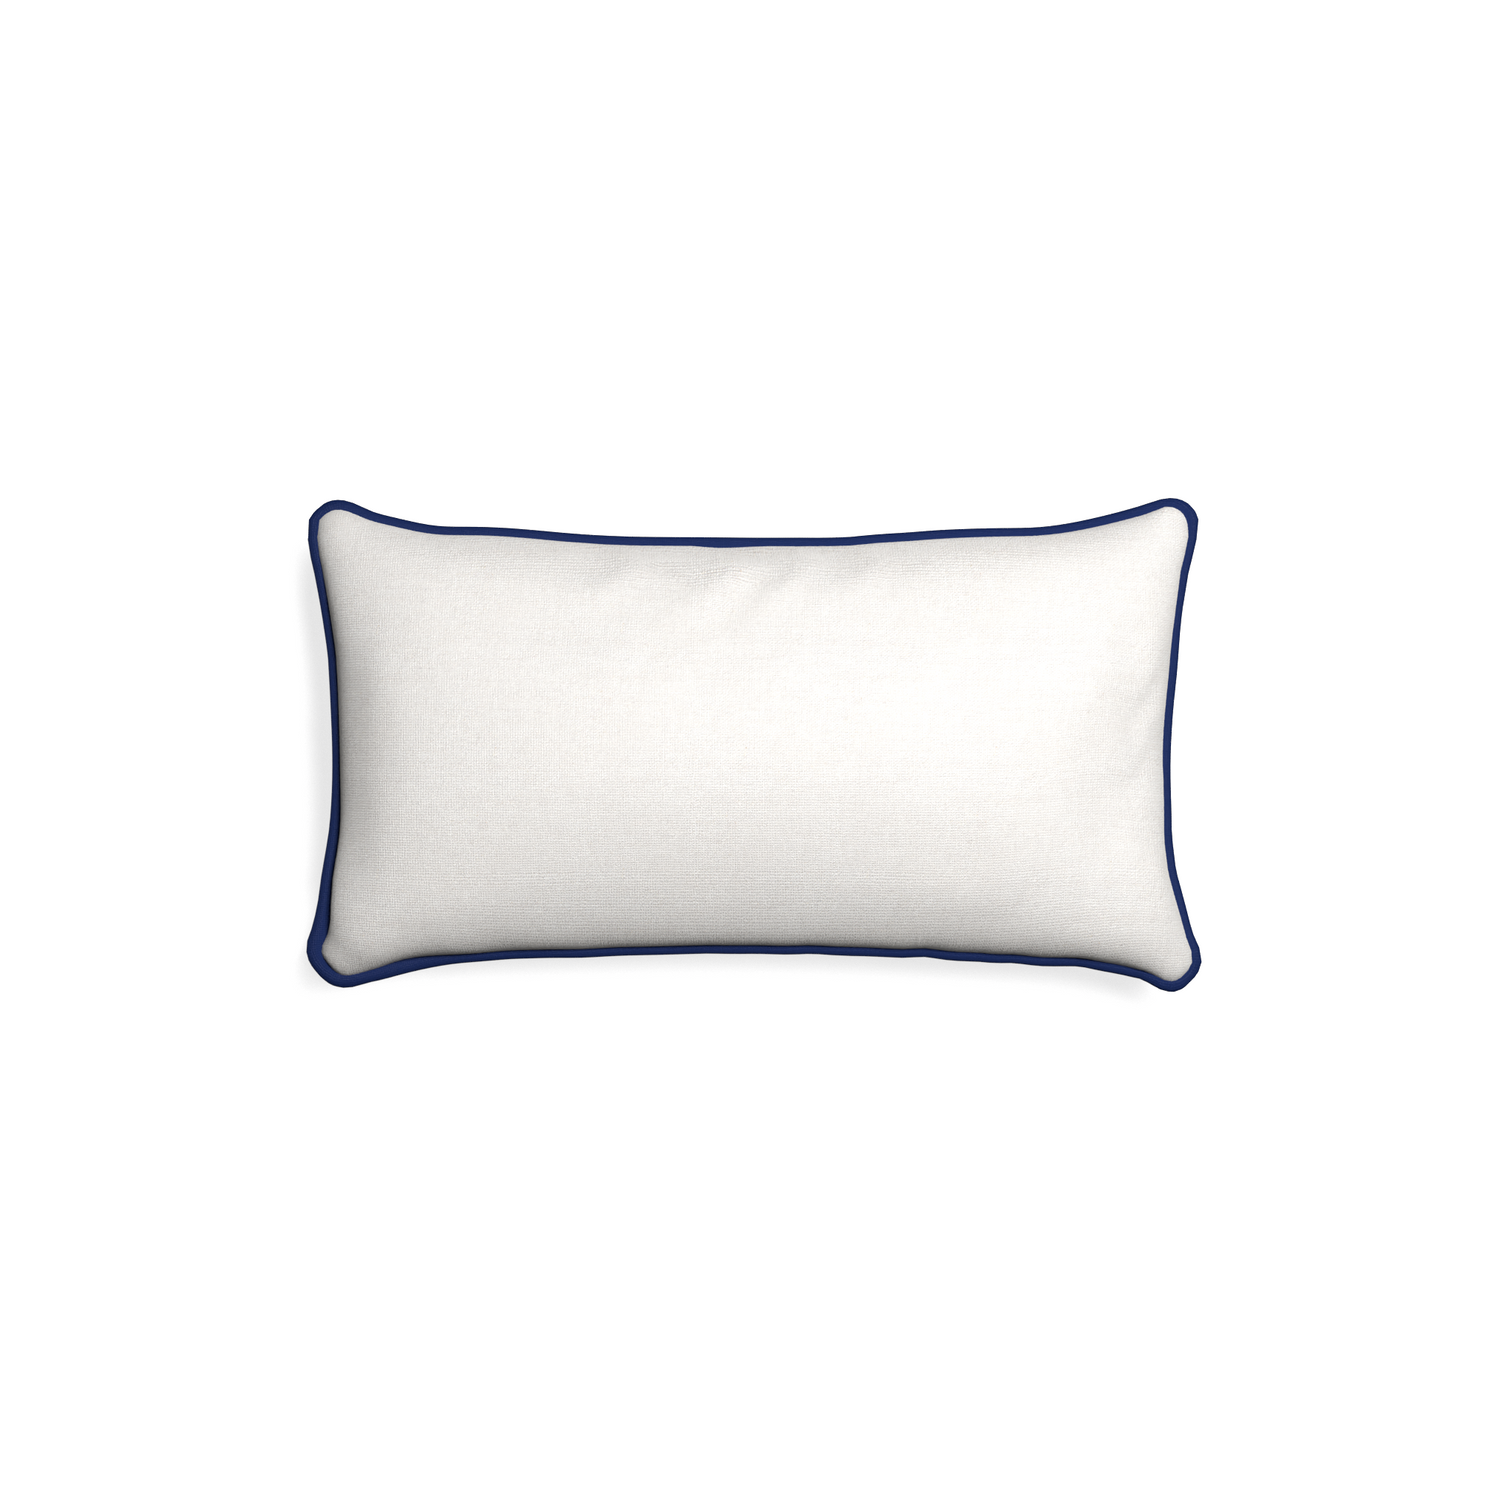 Petite-lumbar flour custom natural whitepillow with midnight piping on white background